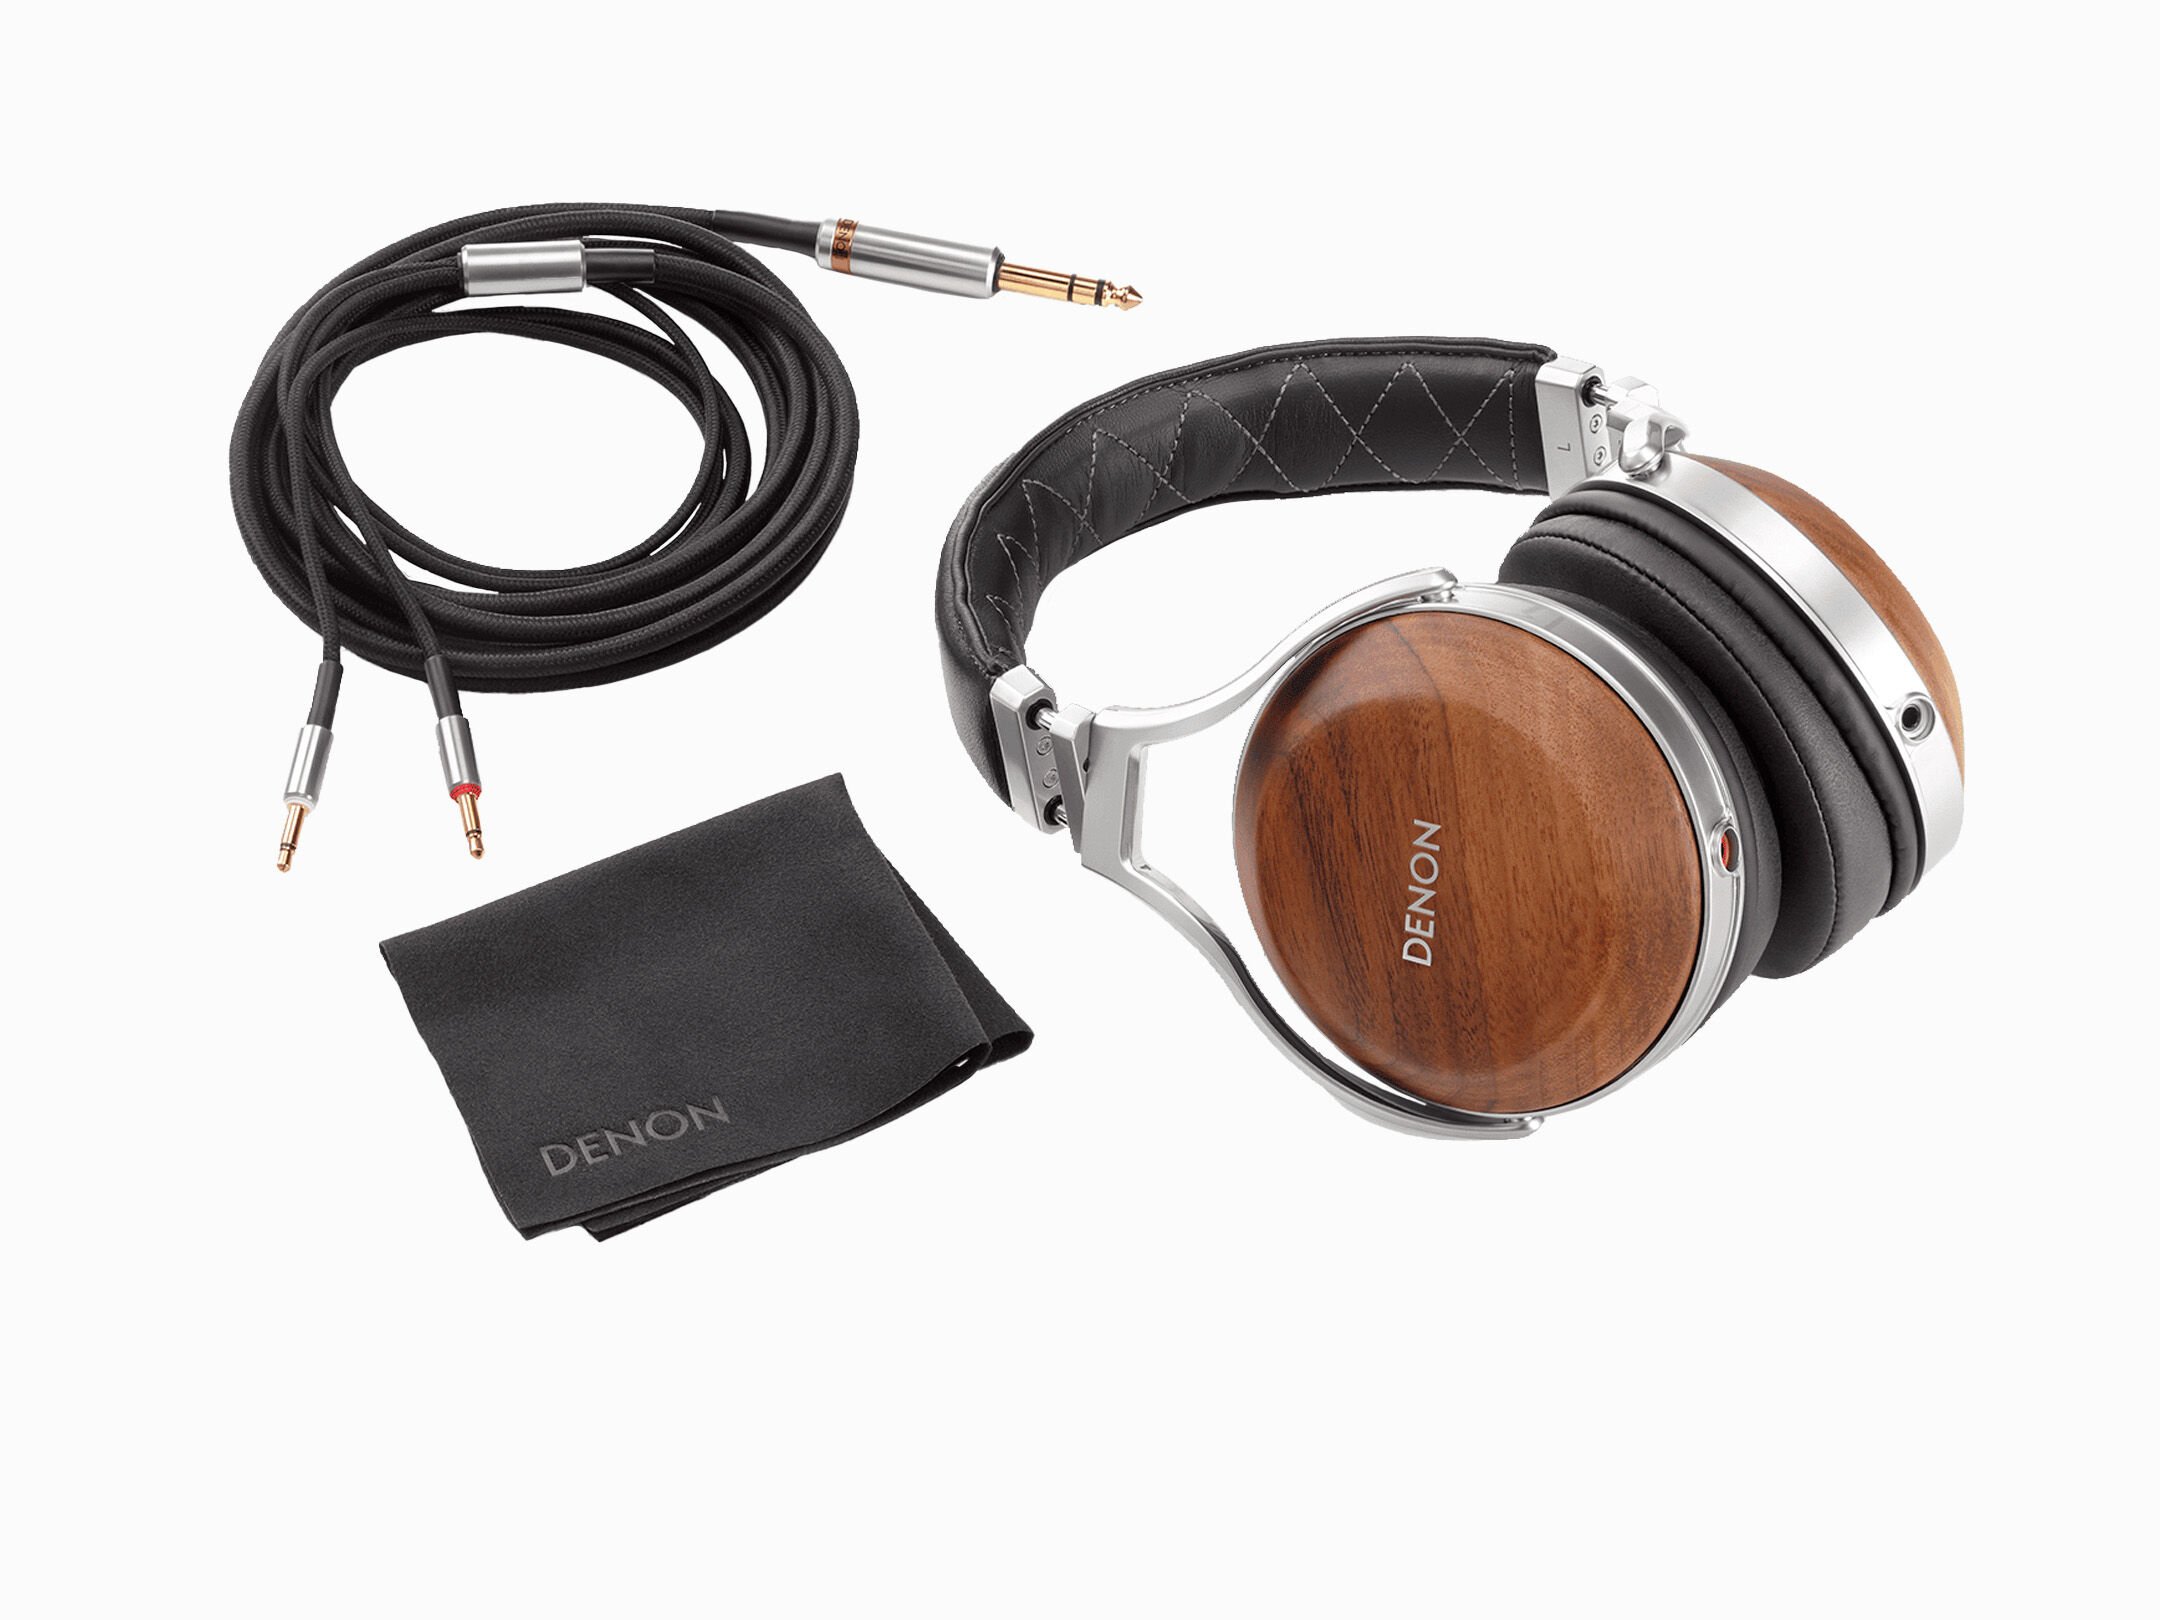 AH-D7200 - Reference Hi-Fi Headphones with drivers made in Japan 